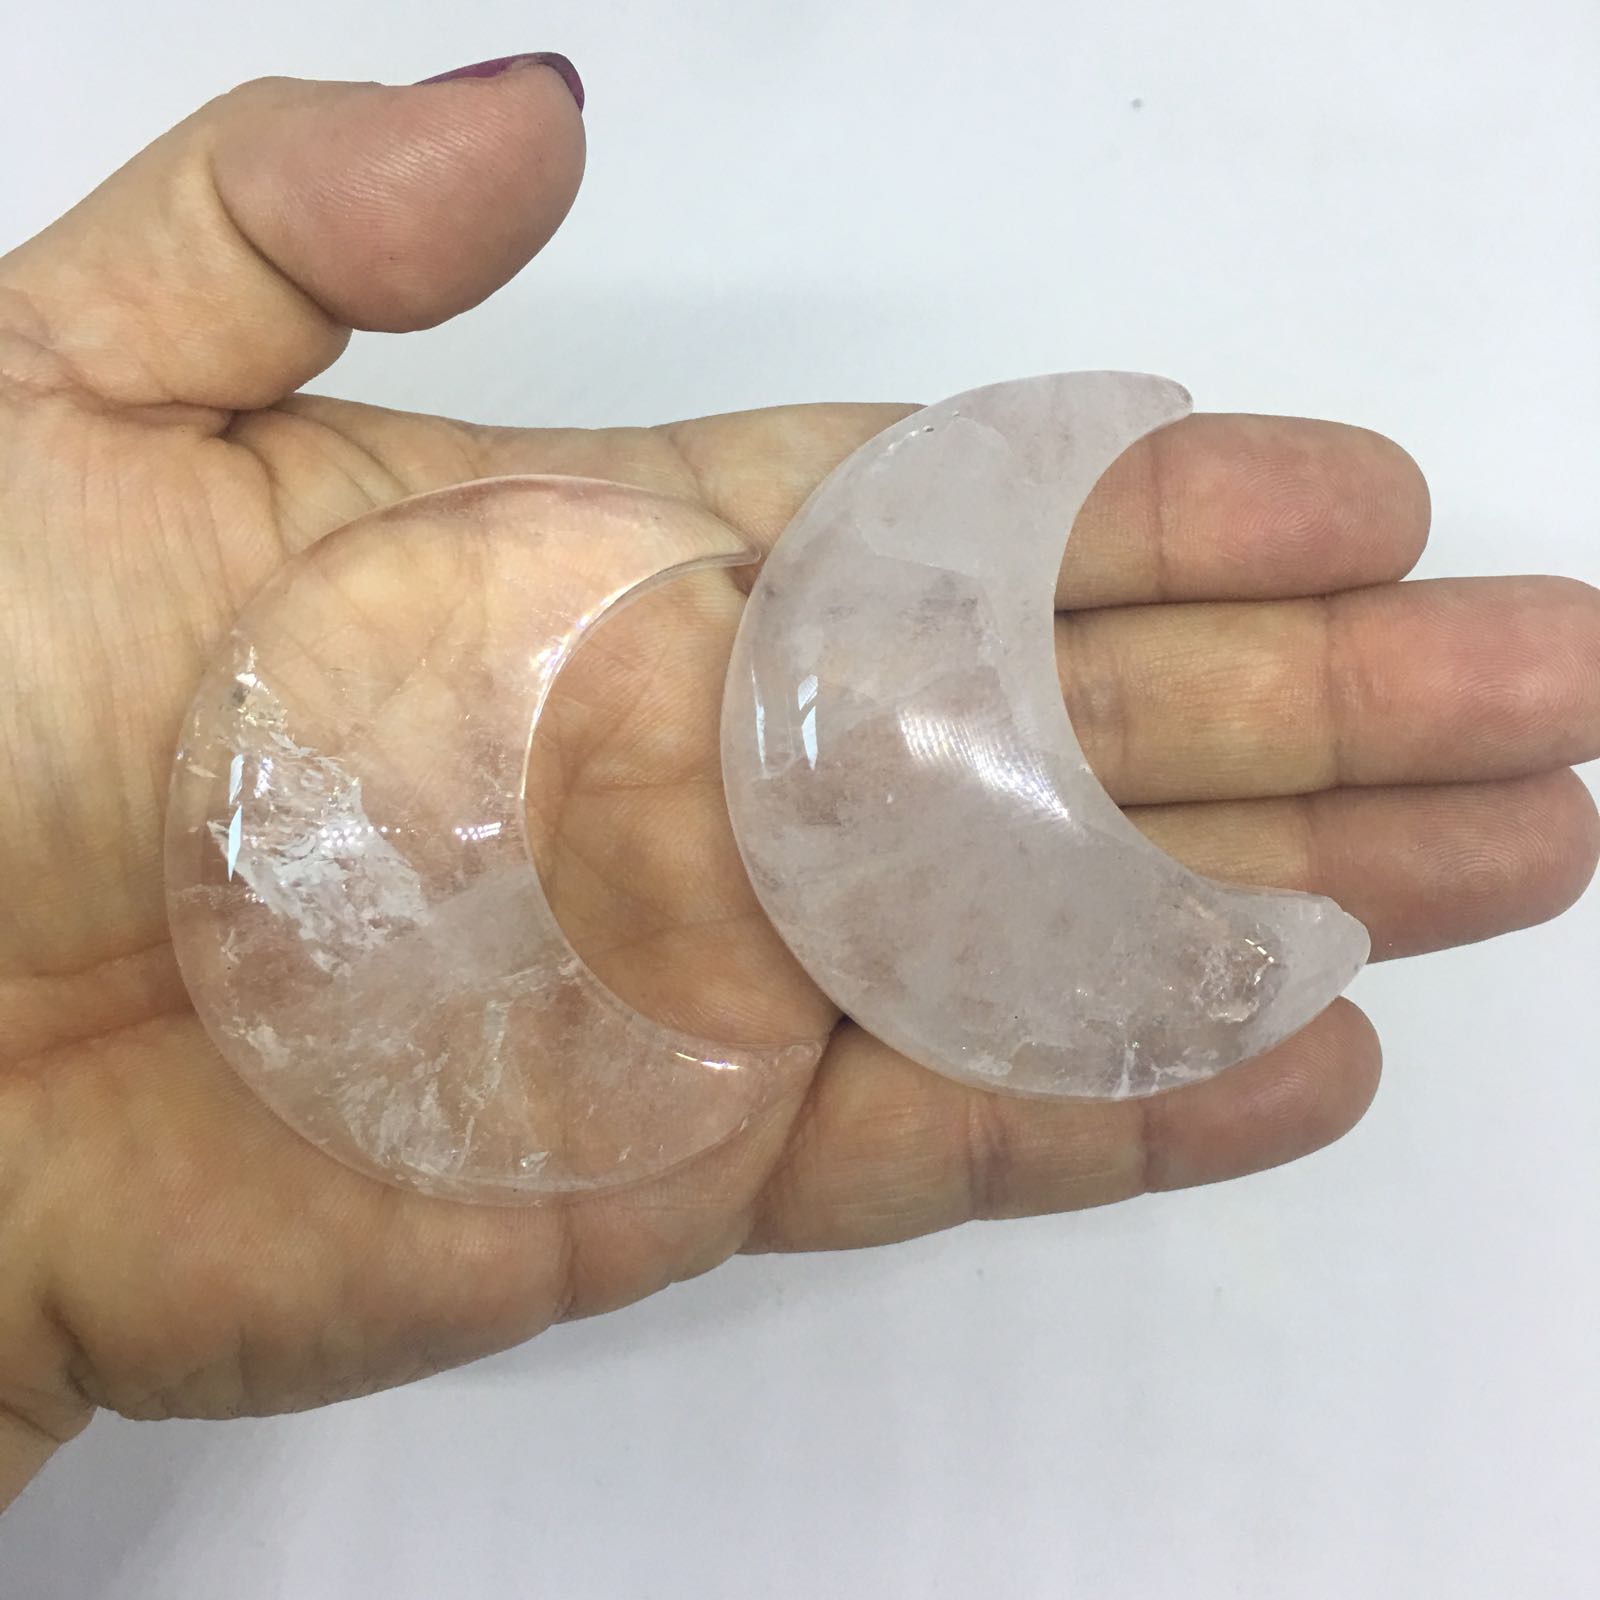 Stones from Uruguay - Clear Quartz Crystal Moon Crescent Cabochons for Spiritual Practices, Crafting & Meditation